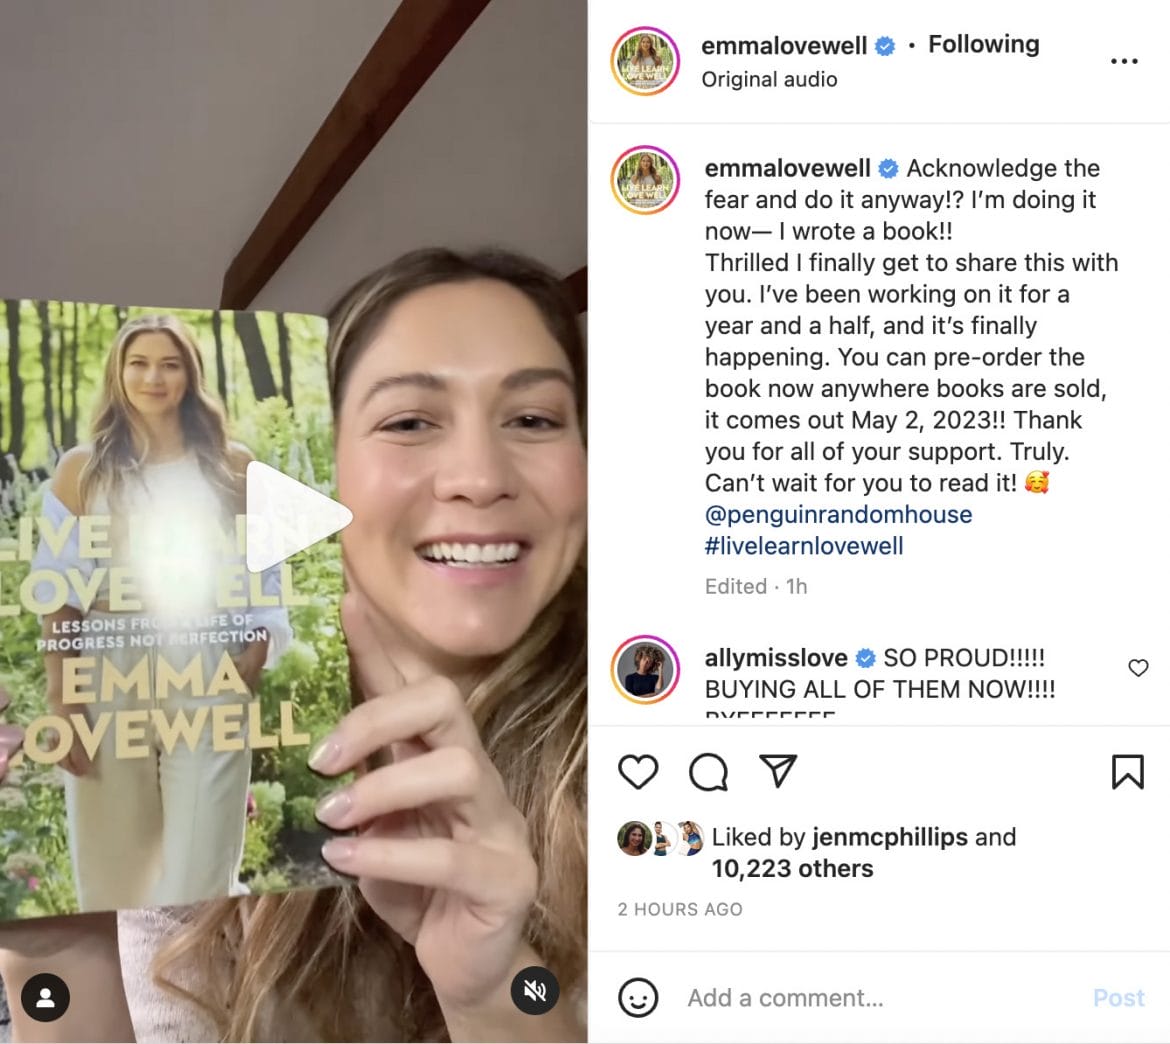 Emma Lovewell's book announcement on Instagram.